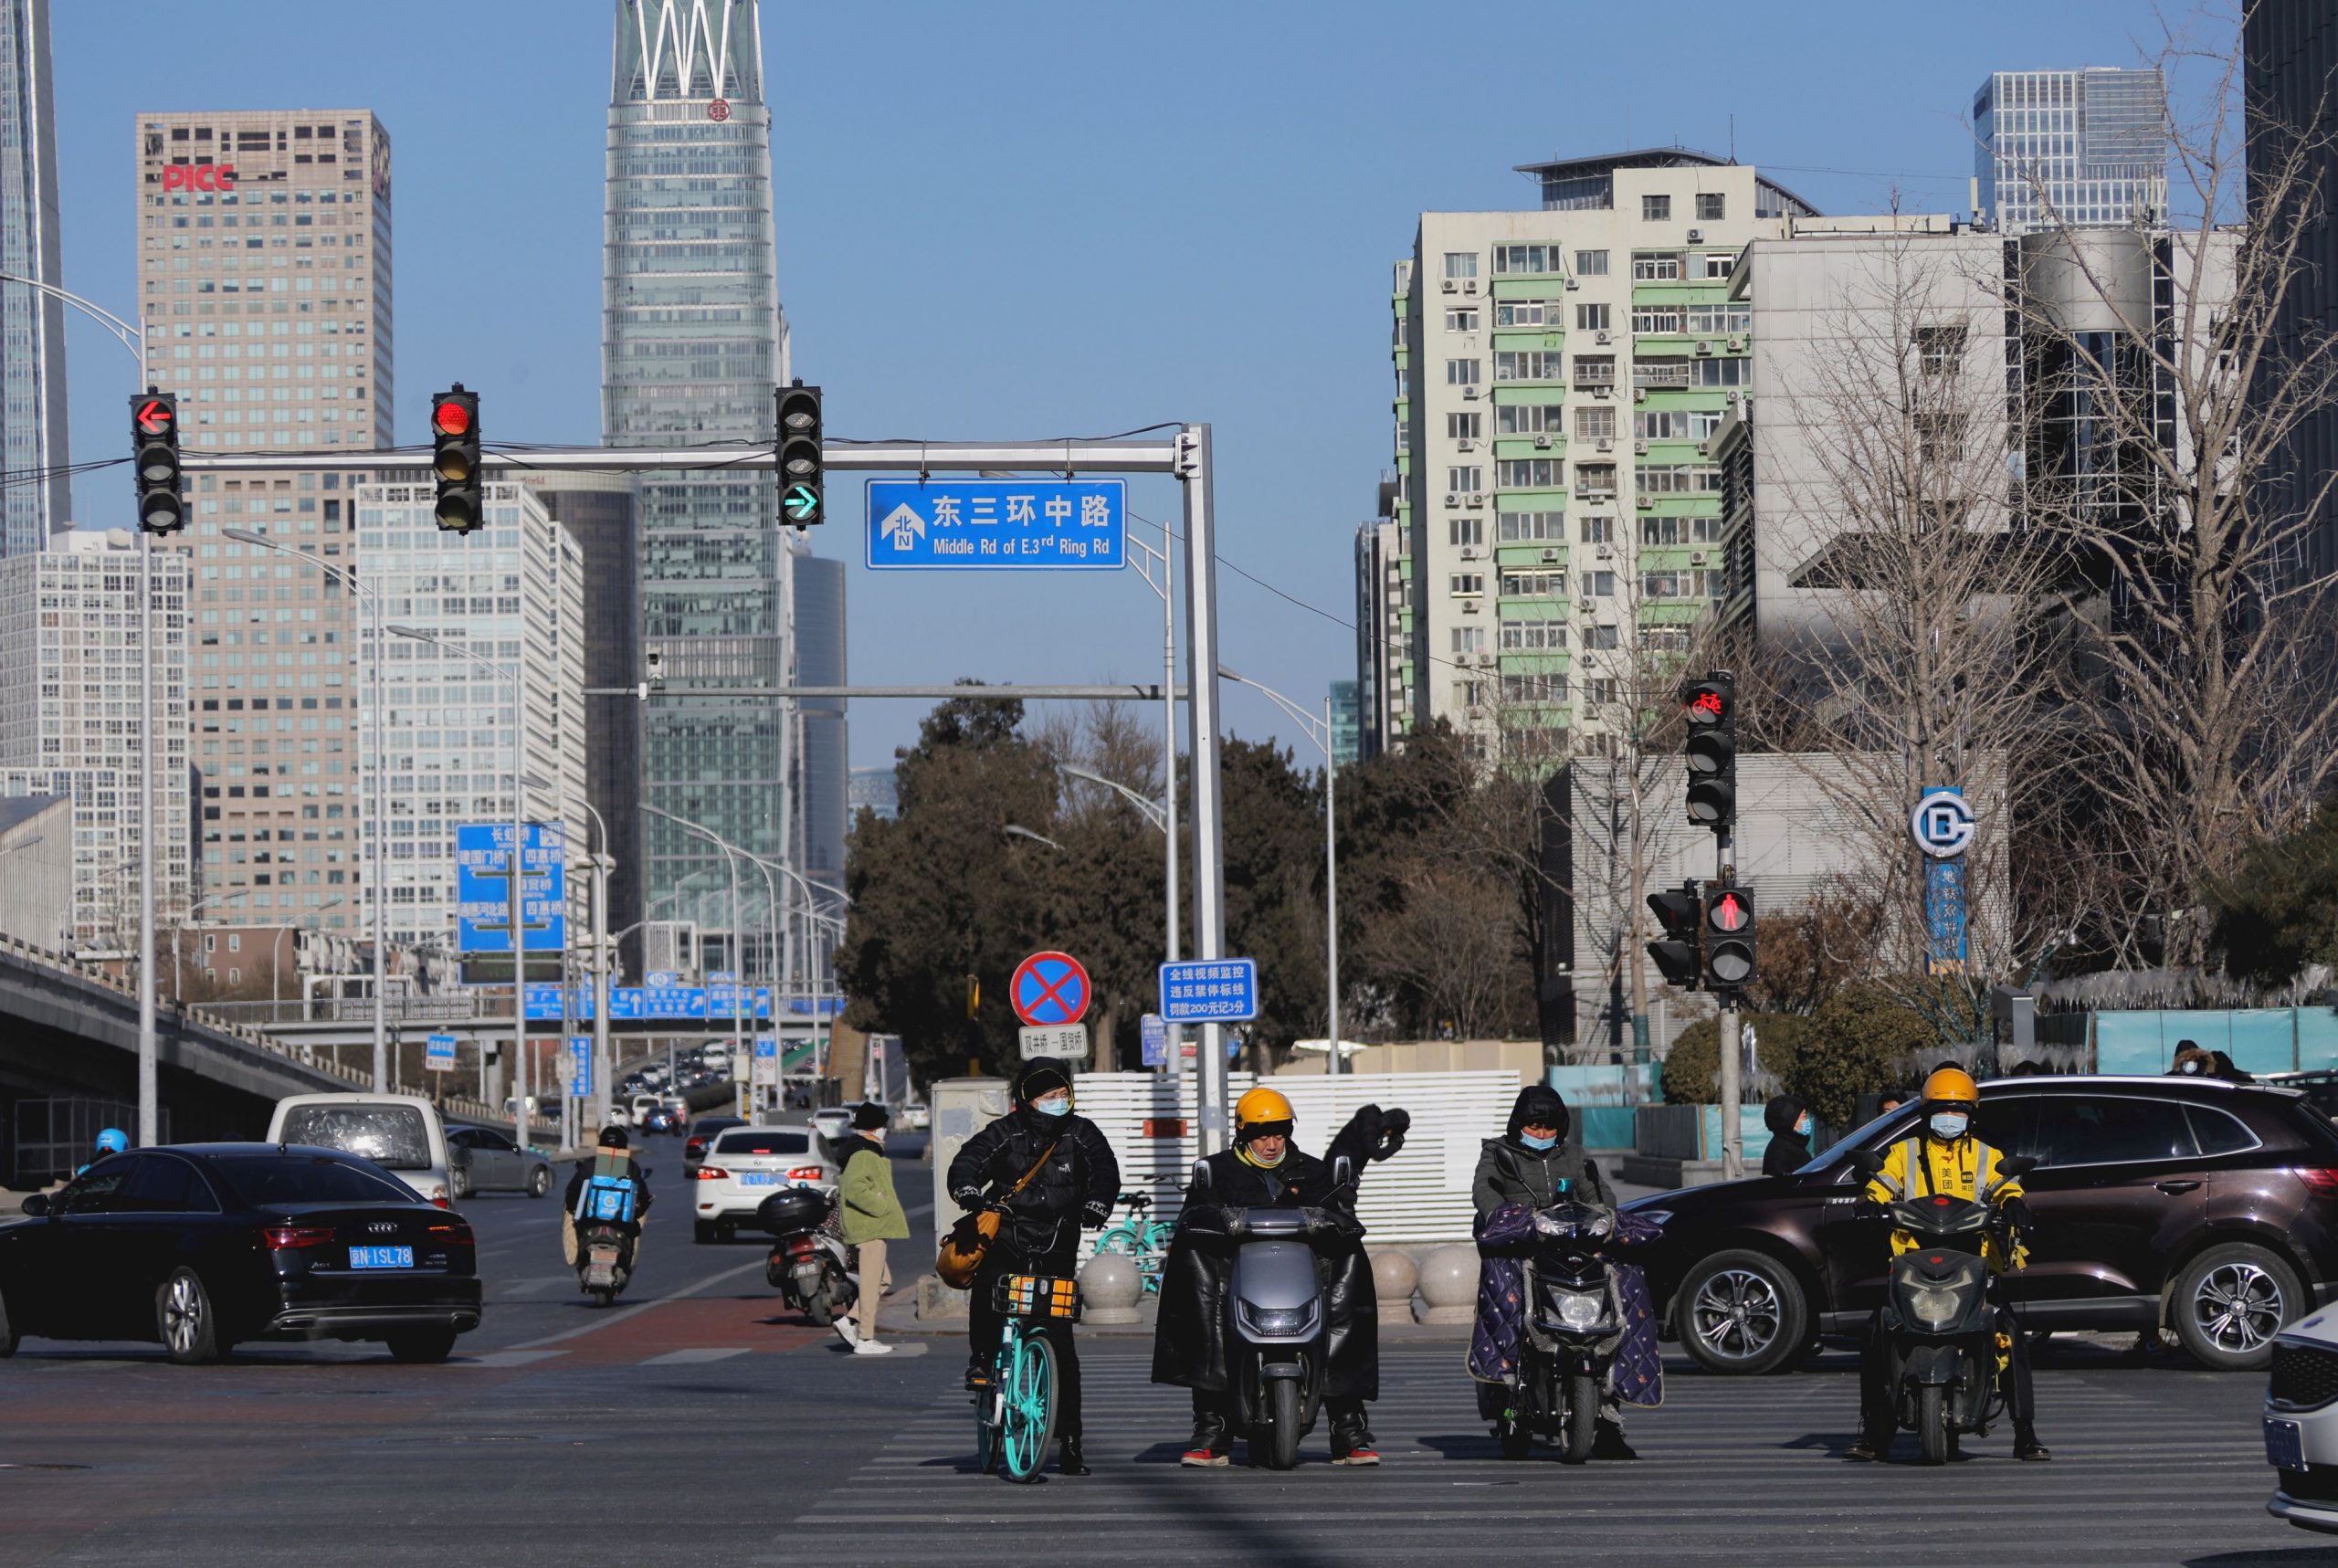 epa08910734 People wearing protective face masks ride their scooters at a street in Beijing, China, 30 December 2020, amid the coronavirus disease (COVID-19) pandemic. China reported 24 new cases of COVID-19 on the mainland on 29 December 2020.  EPA/WU HONG